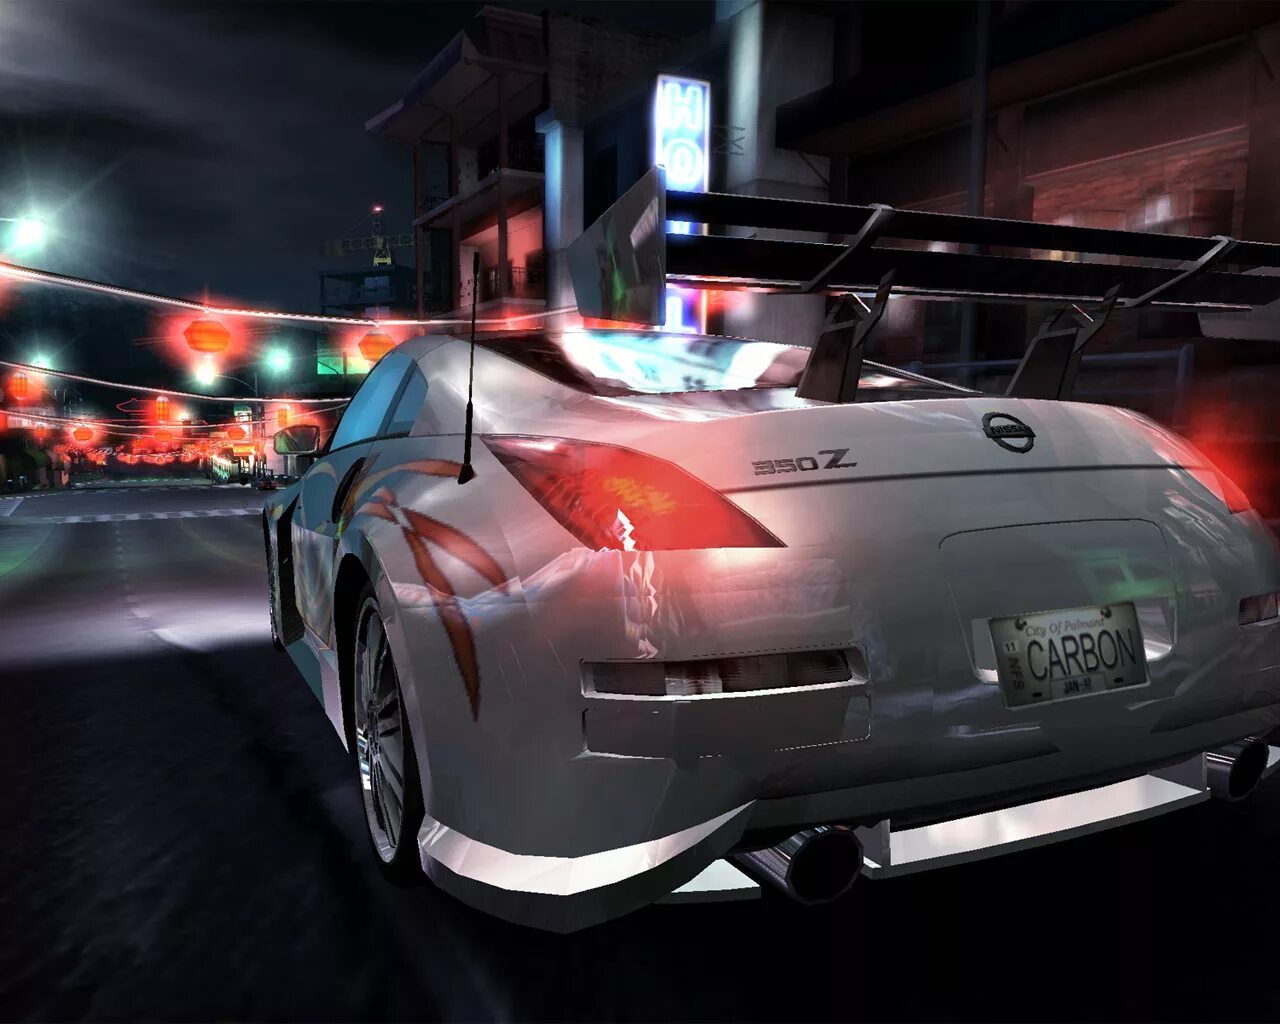 Nissan 350z из need for Speed карбон. Нфс карбон 2. Need for Speed карбон. Nissan 350z NFS. Новая игра need for speed